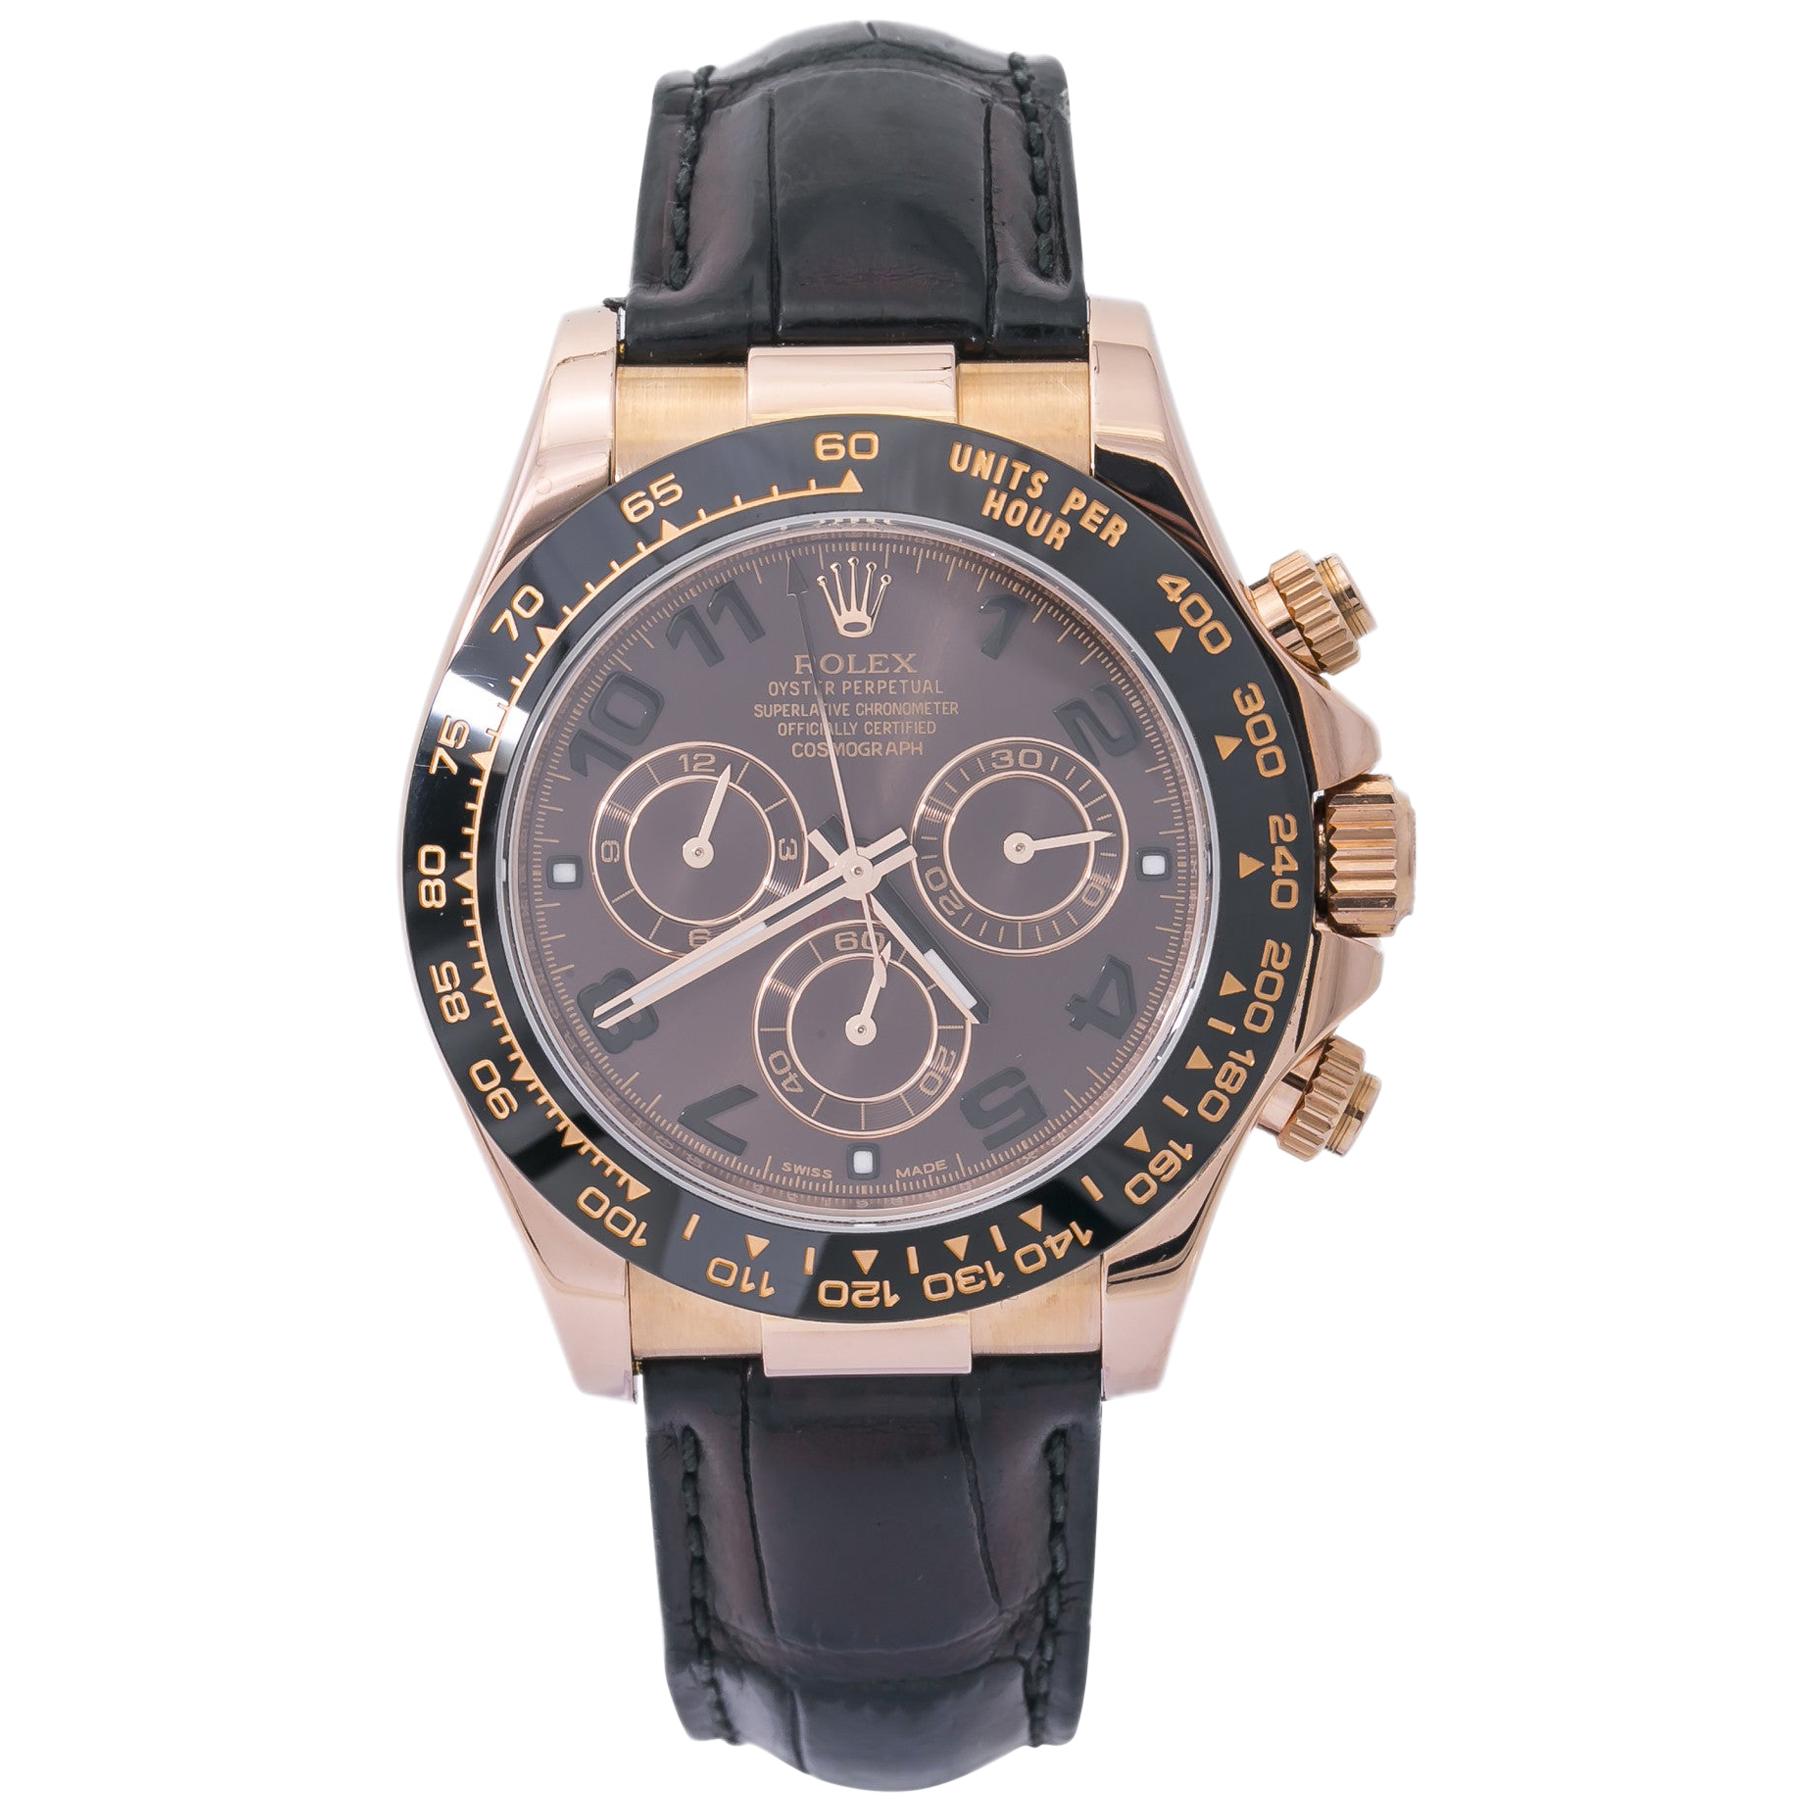 Rolex Daytona 116515LN Ceramic 18K Rose Chocolate with Papers Automatic Watch